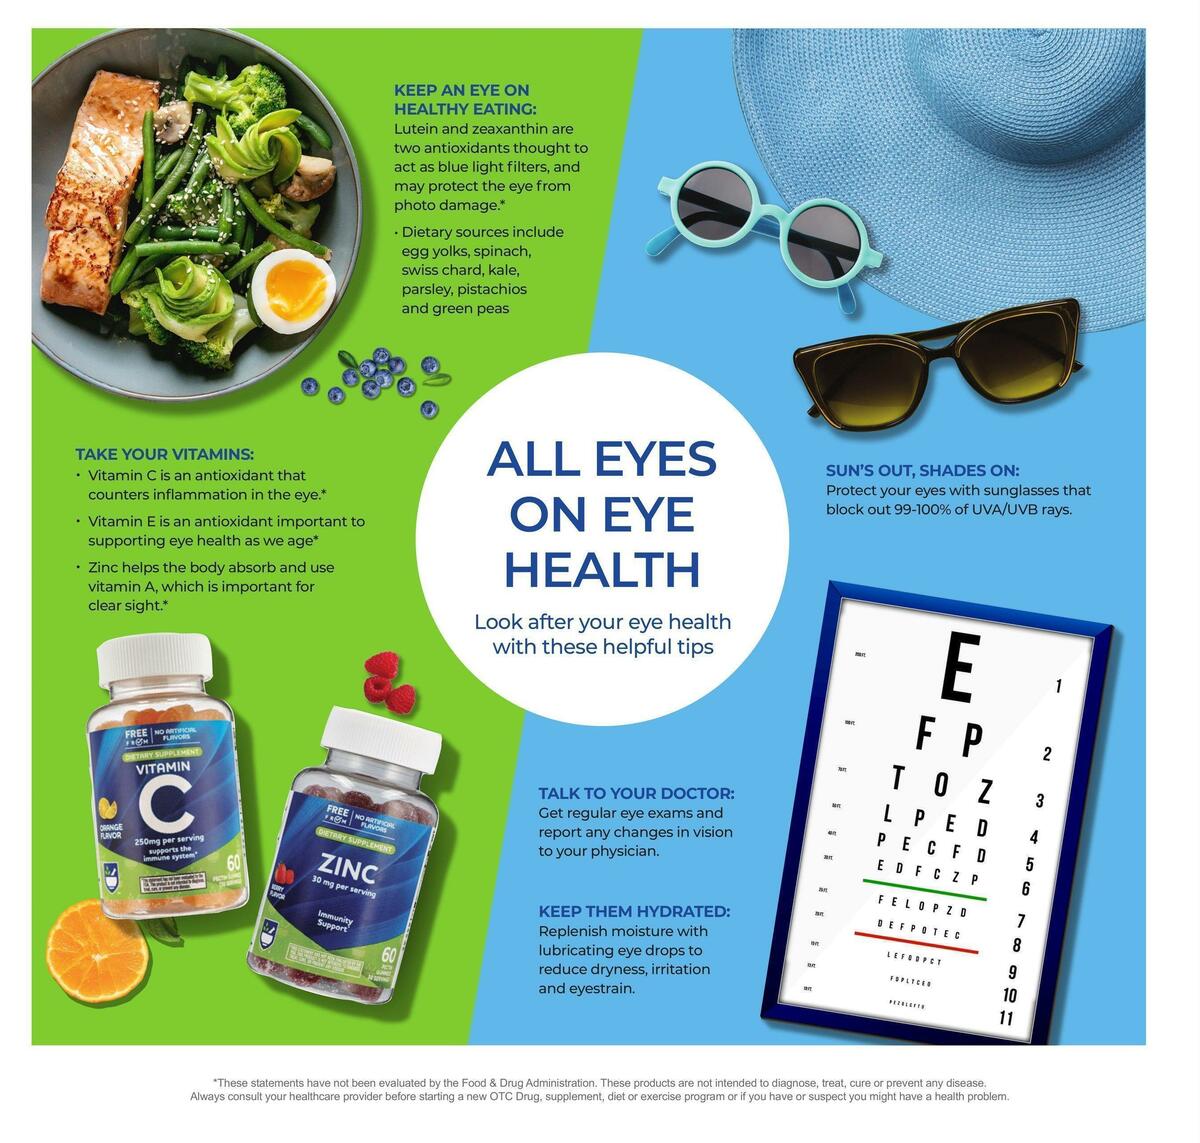 Rite Aid Weekly Ad from August 7